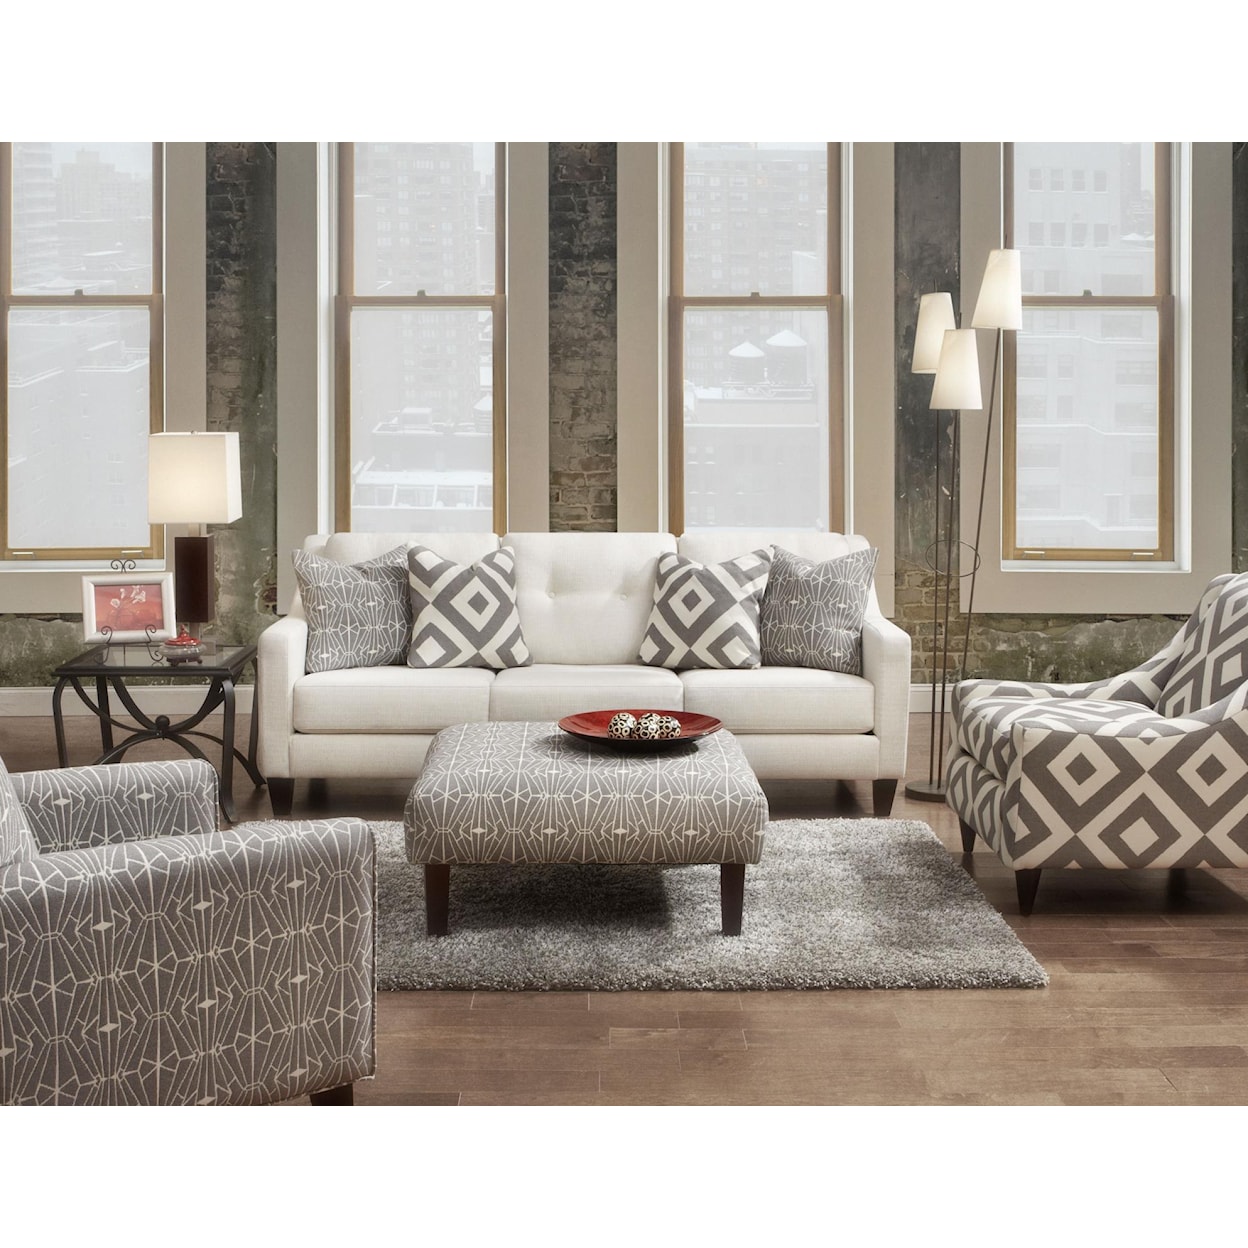 Fusion Furniture 3280B Stationary Living Room Group